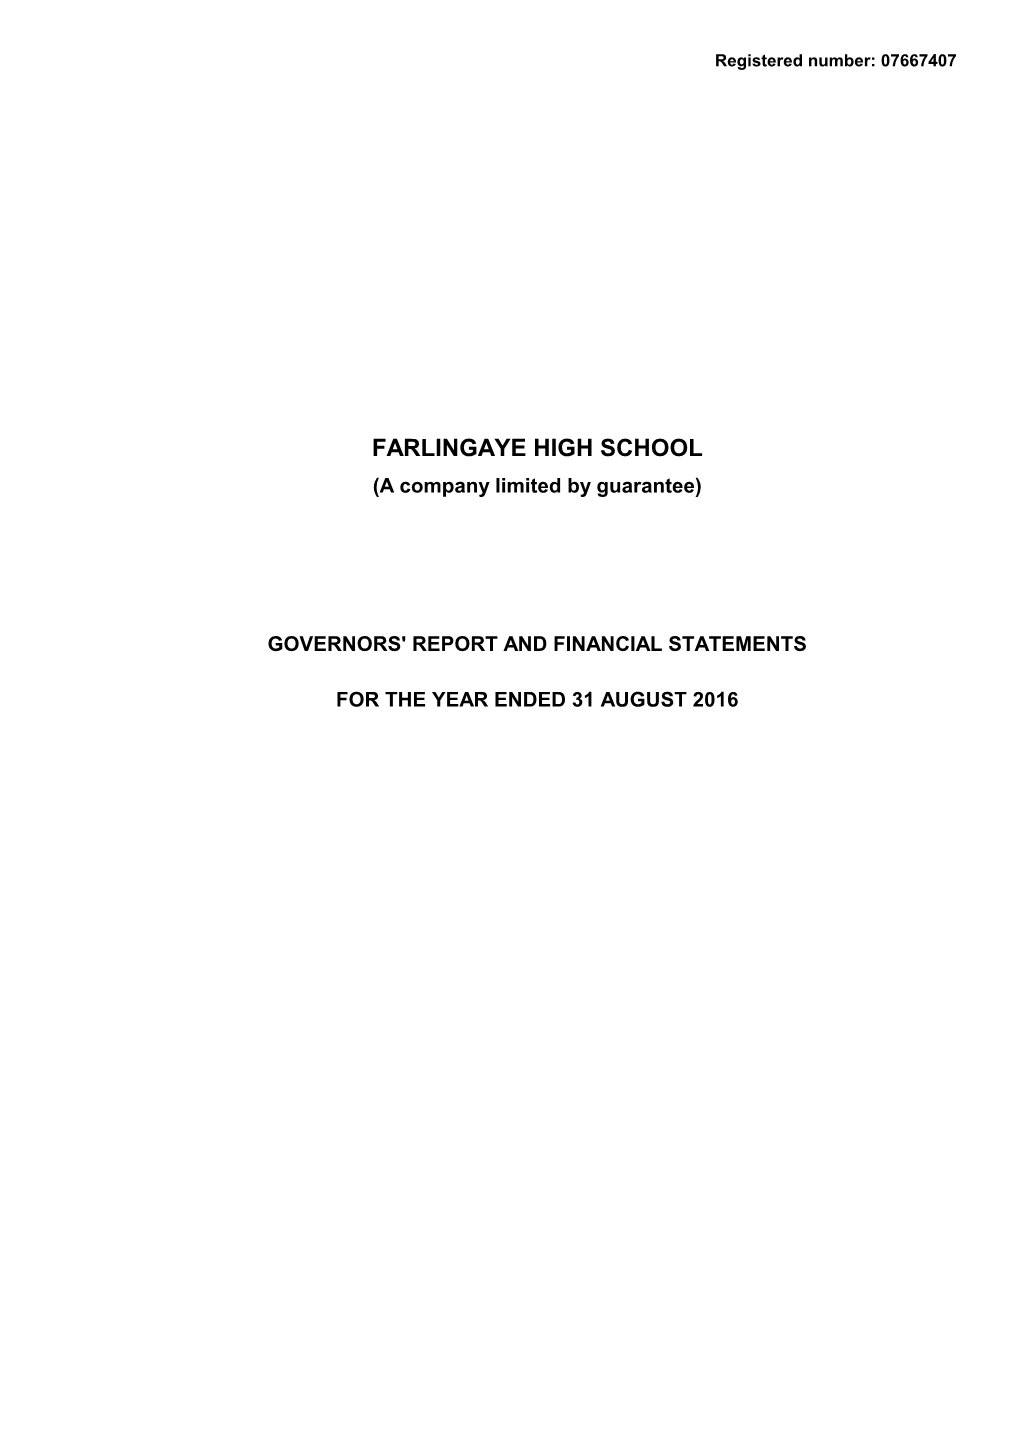 Governors Report and Financial Statement